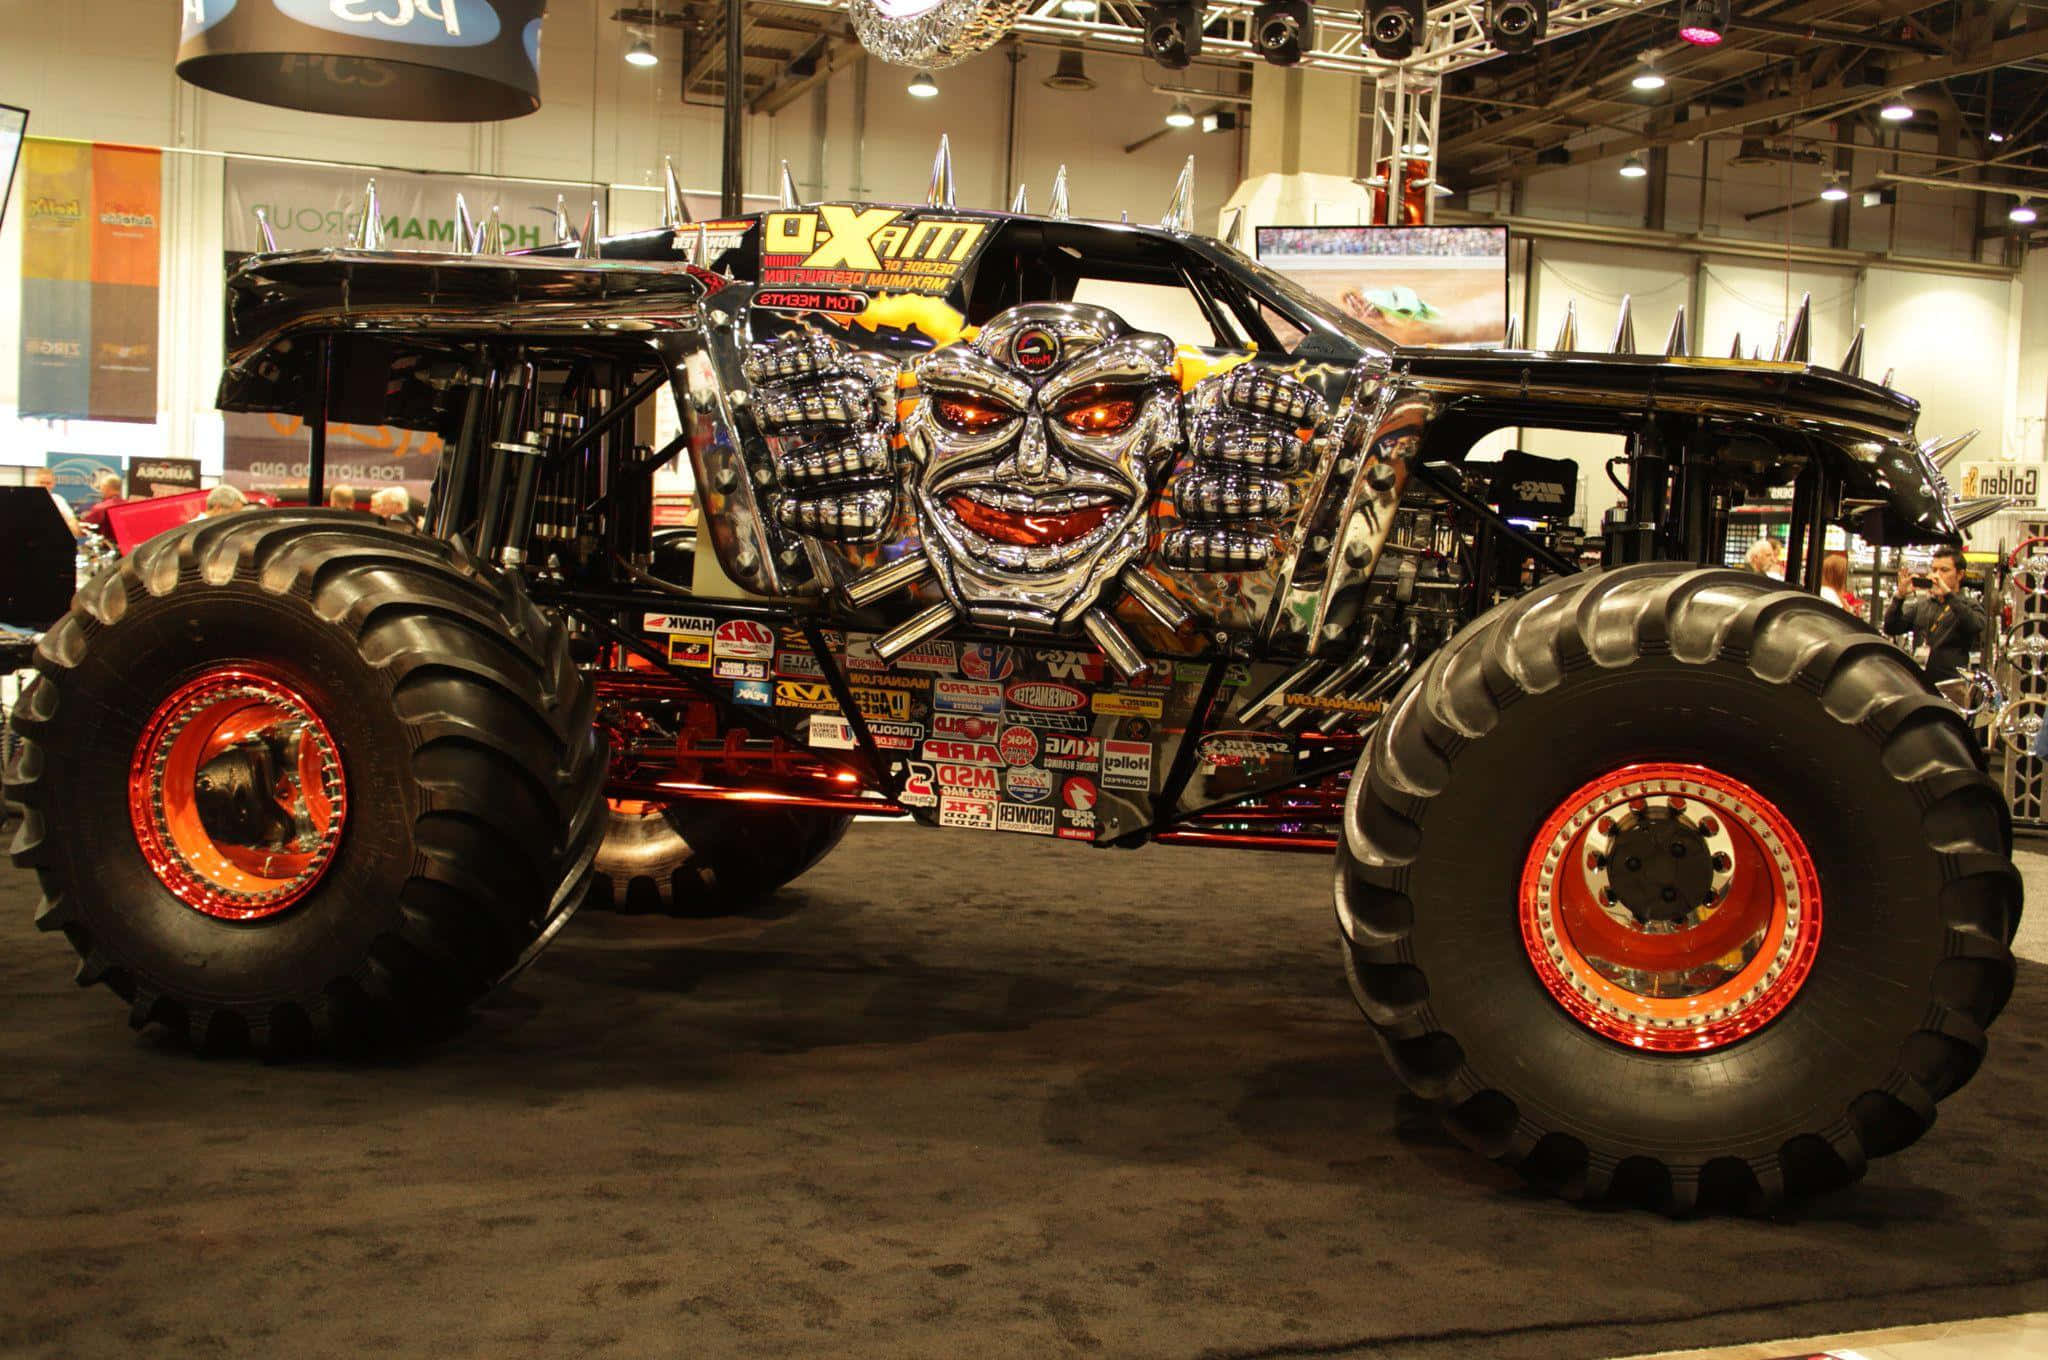 A Monster Truck On Display